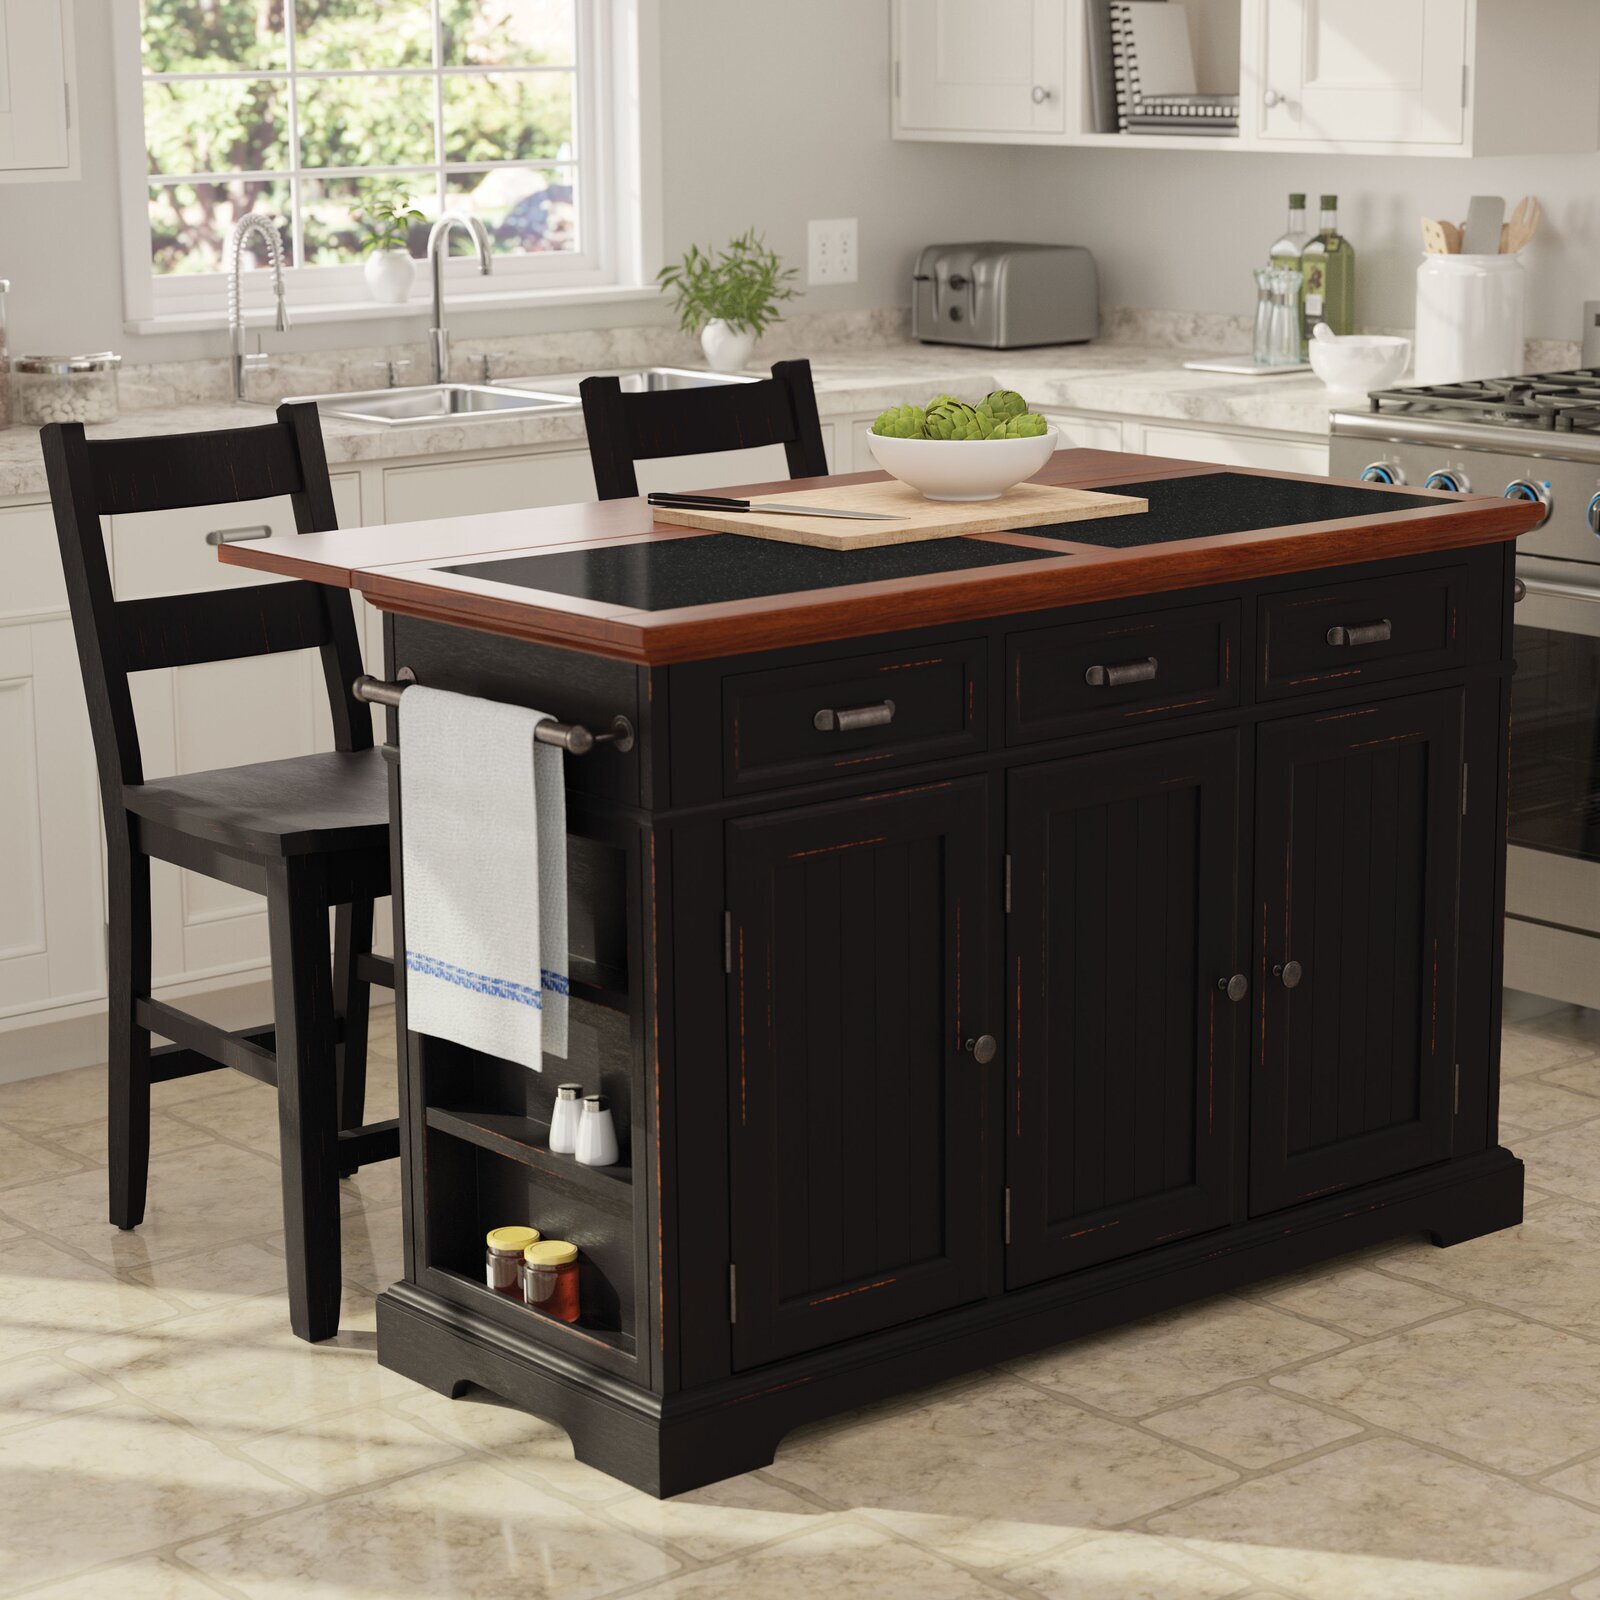 Granite kitchen island with additional perks